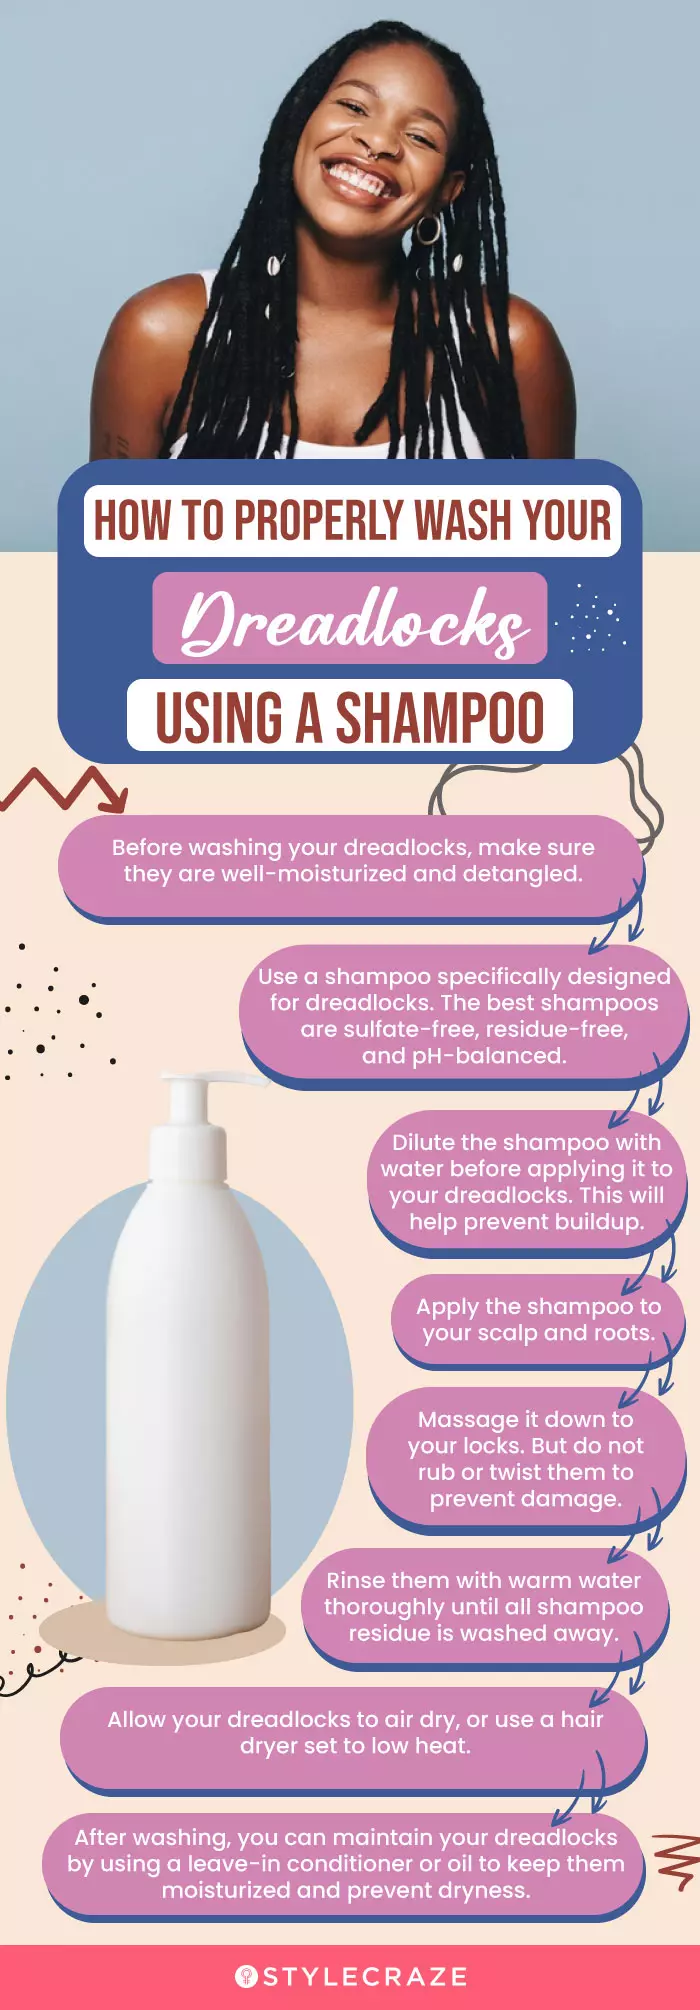 How To Properly Wash Your Dreadlocks Using A Shampoo (infographic)